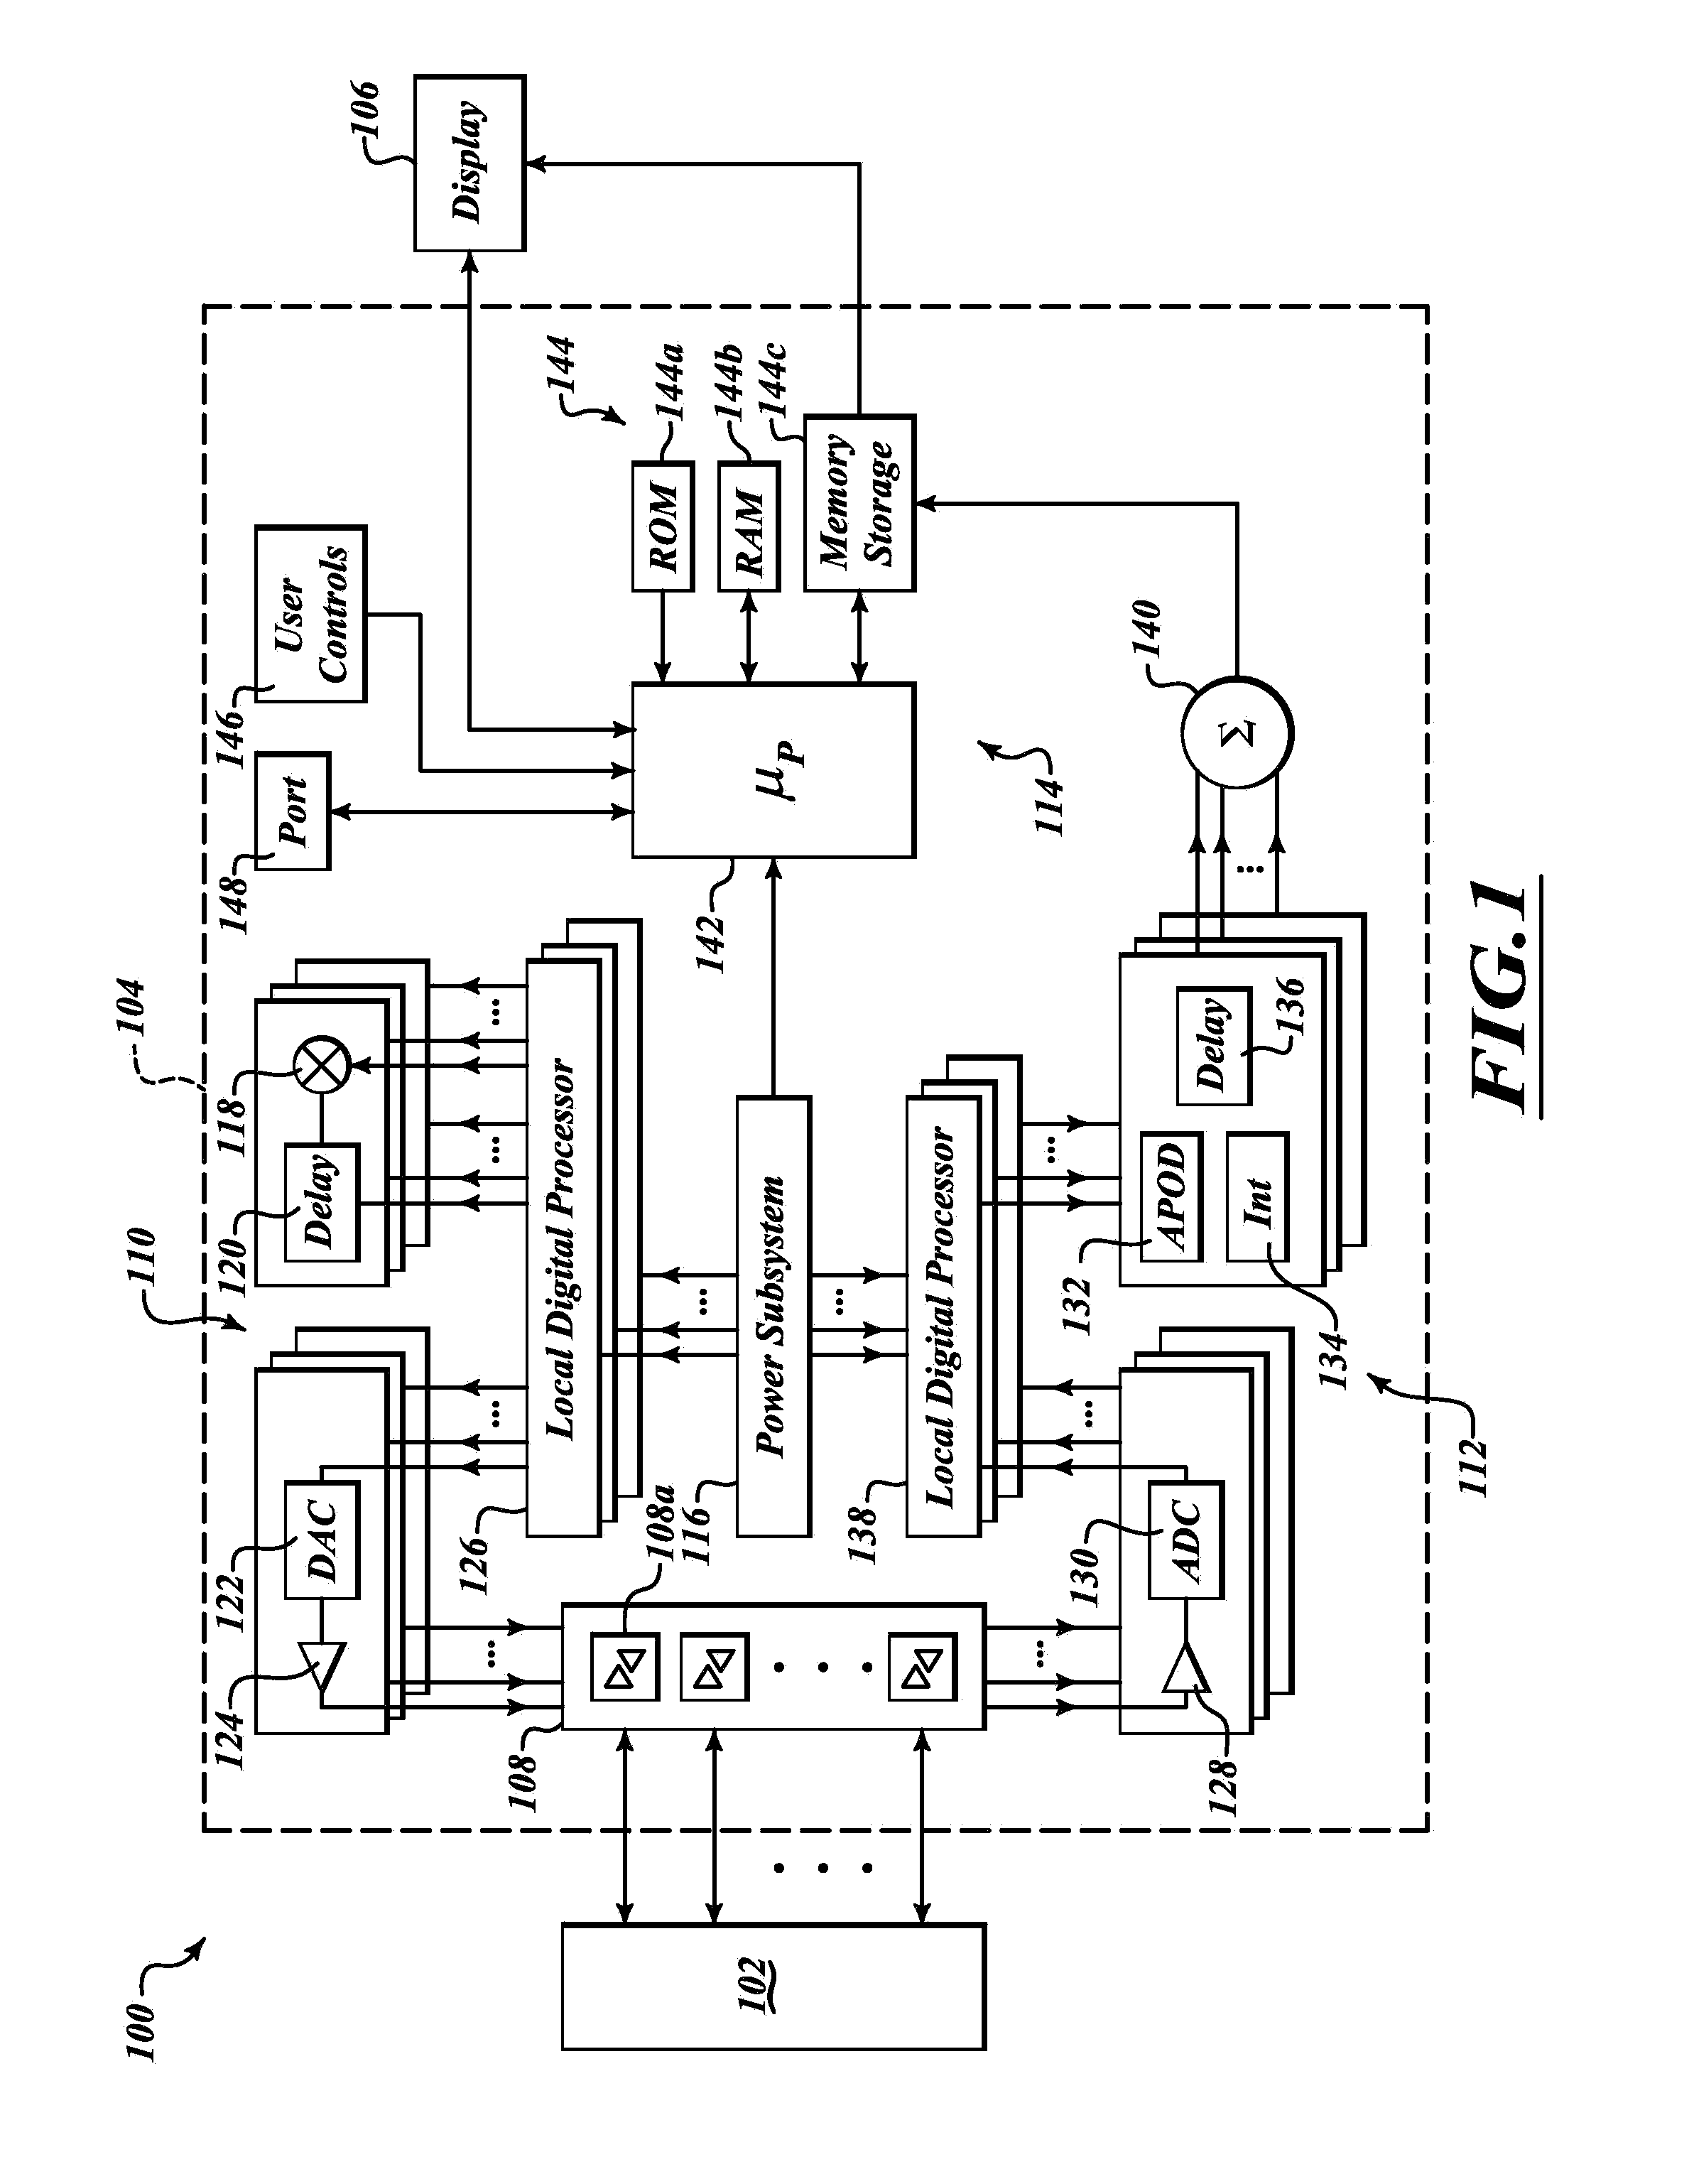 Ultrasound imaging system and method with automatic adjustment and/or multiple sample volumes